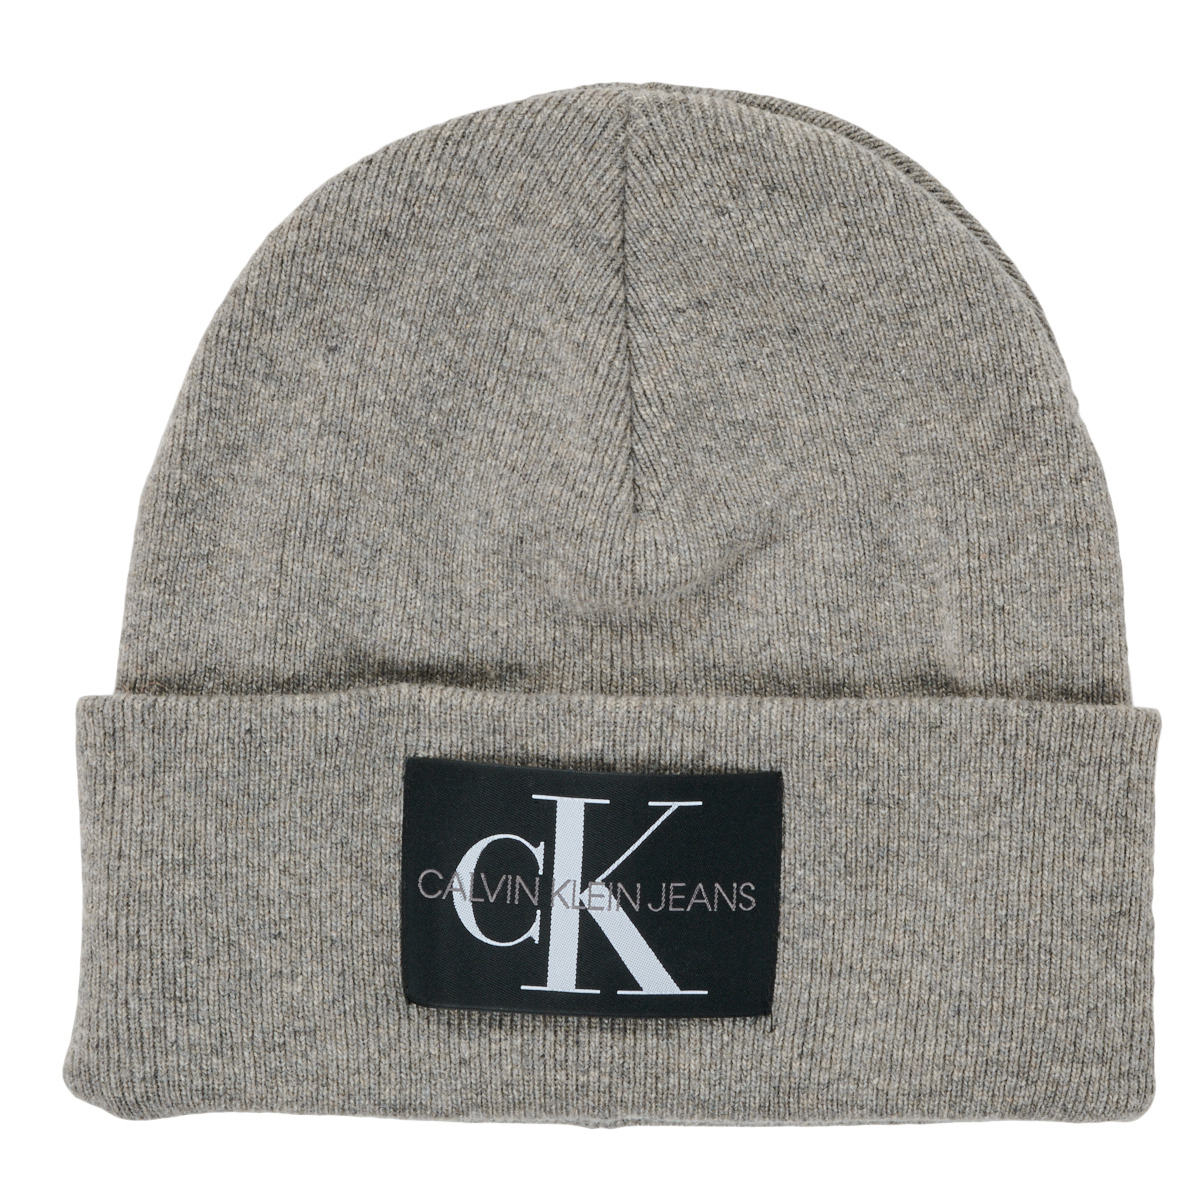 Grey hats Jeans accessories delivery | Free Clothes Klein NON-RIB Calvin NET - Spartoo PATCH BEANIE MONOLOGO ! - Men